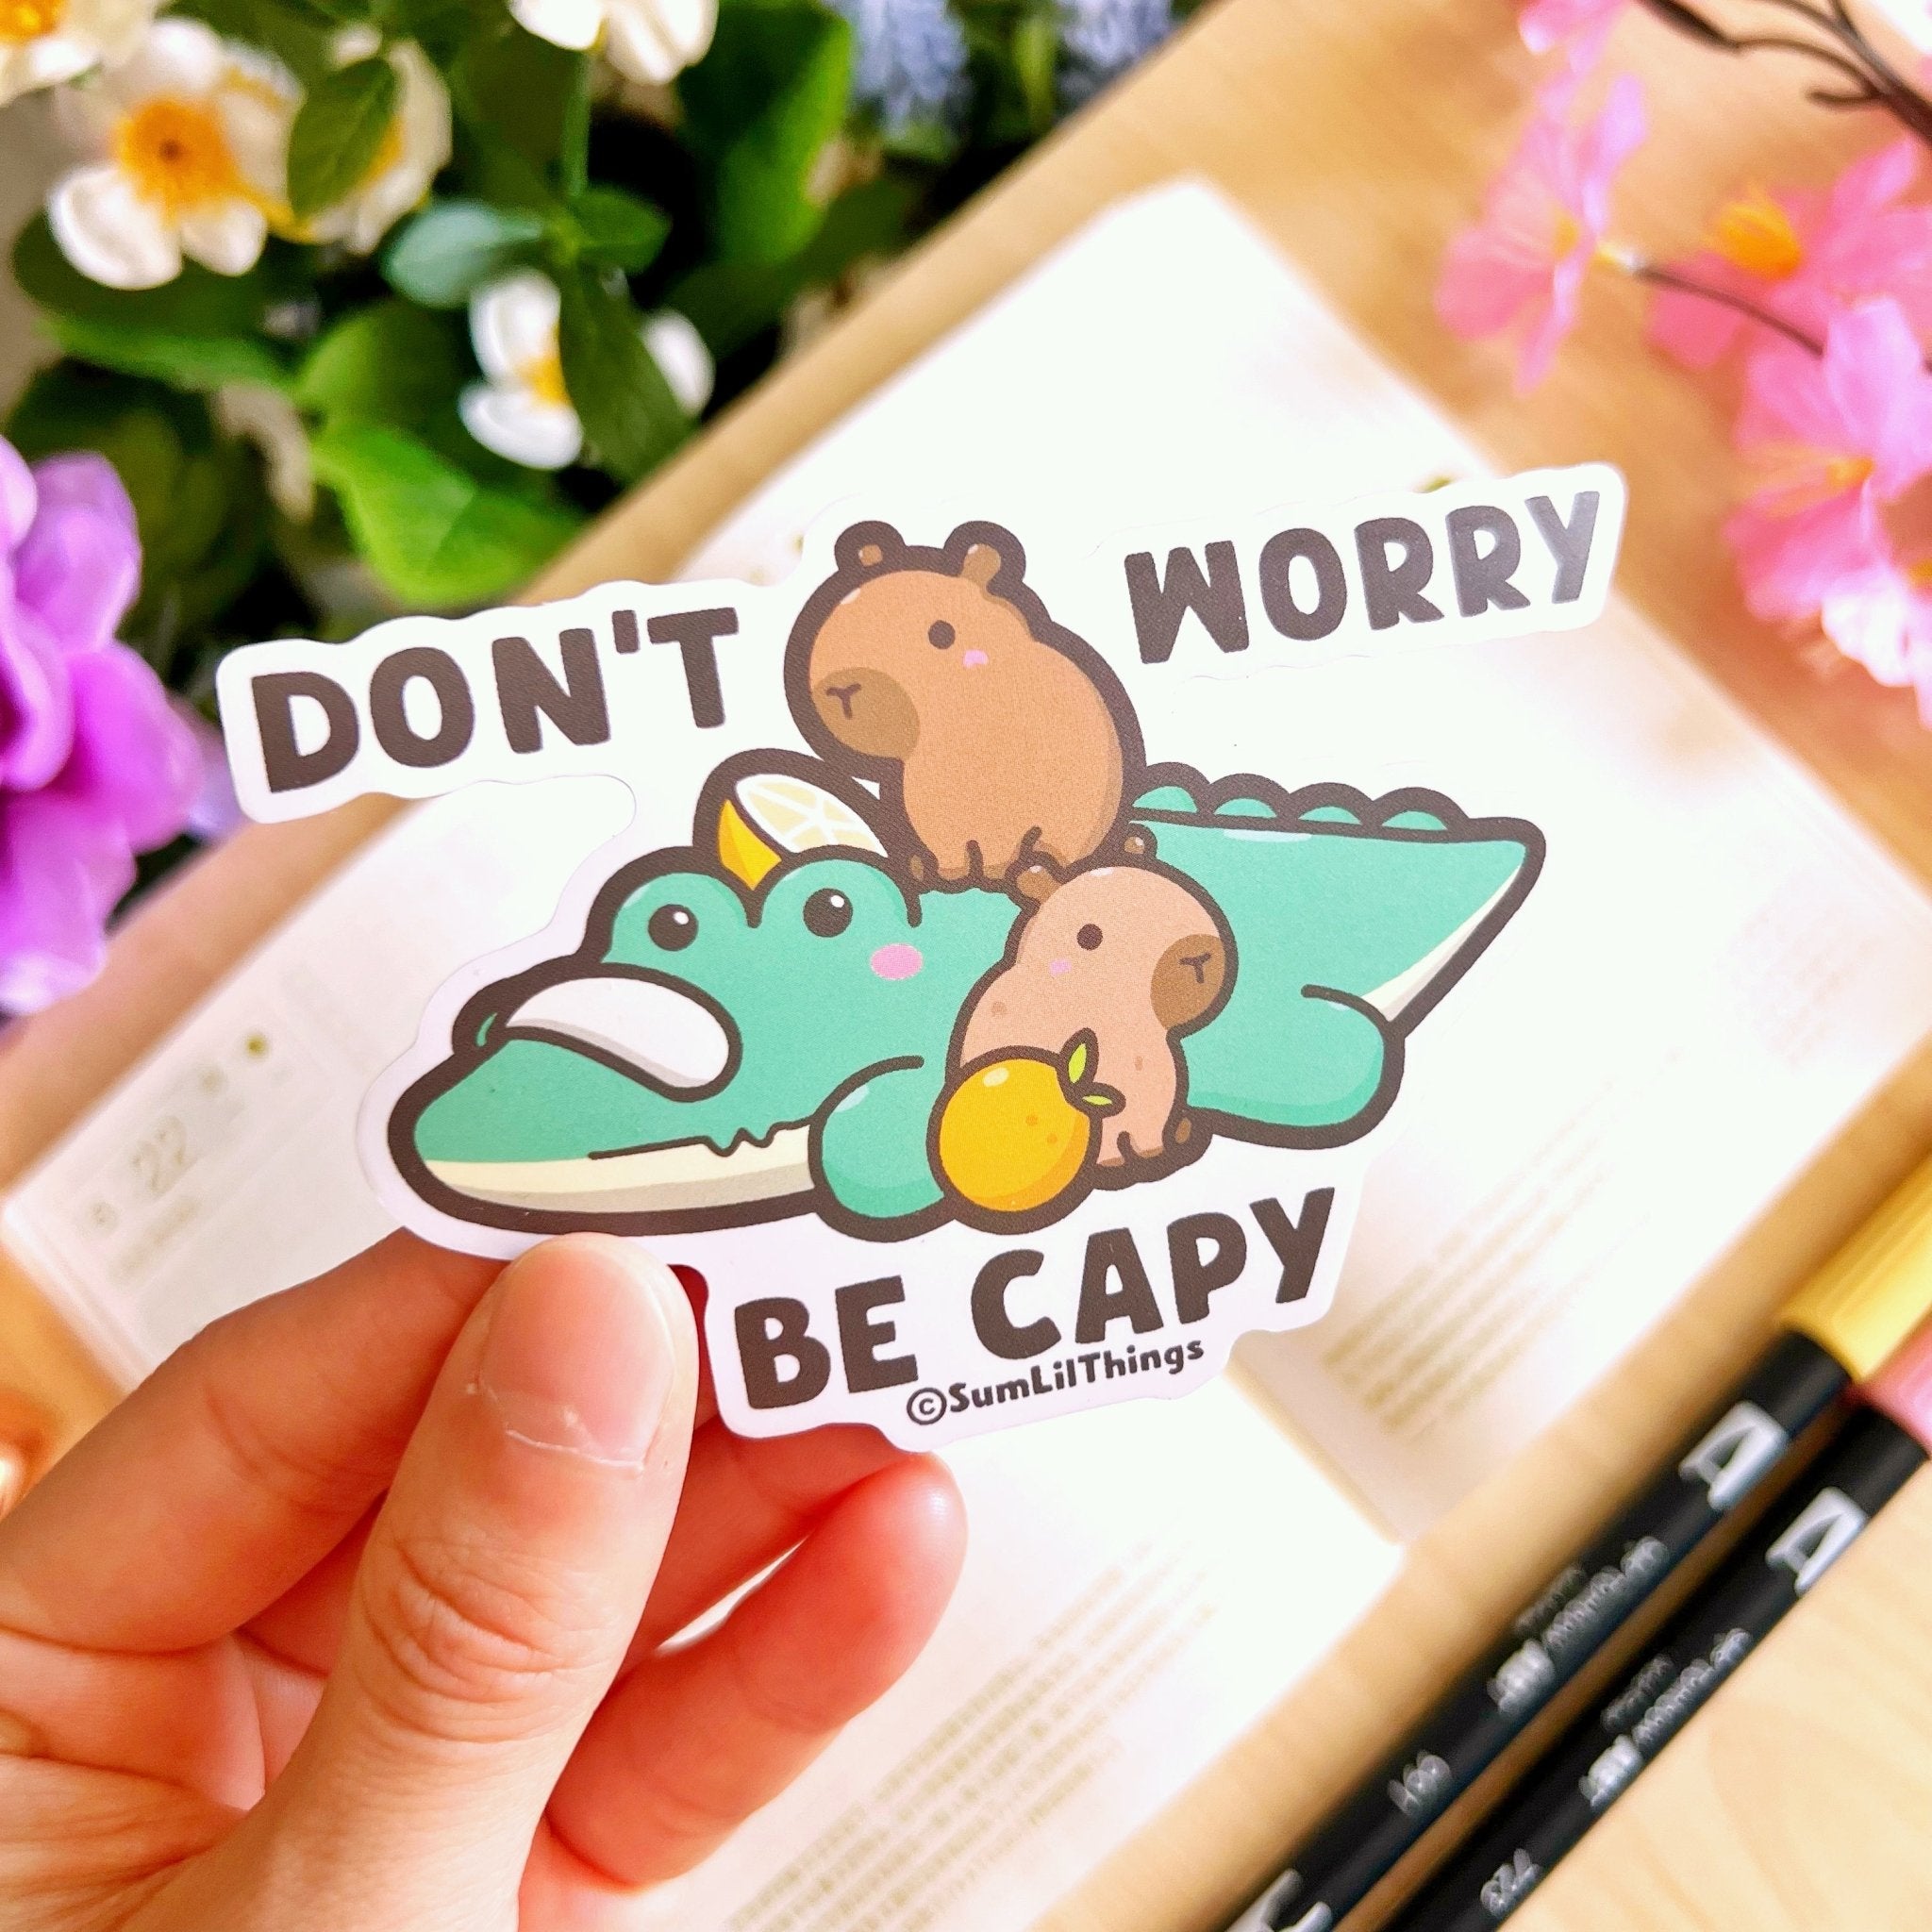 Vinyl Sticker - Don't Worry Be Capy - SumLilThings